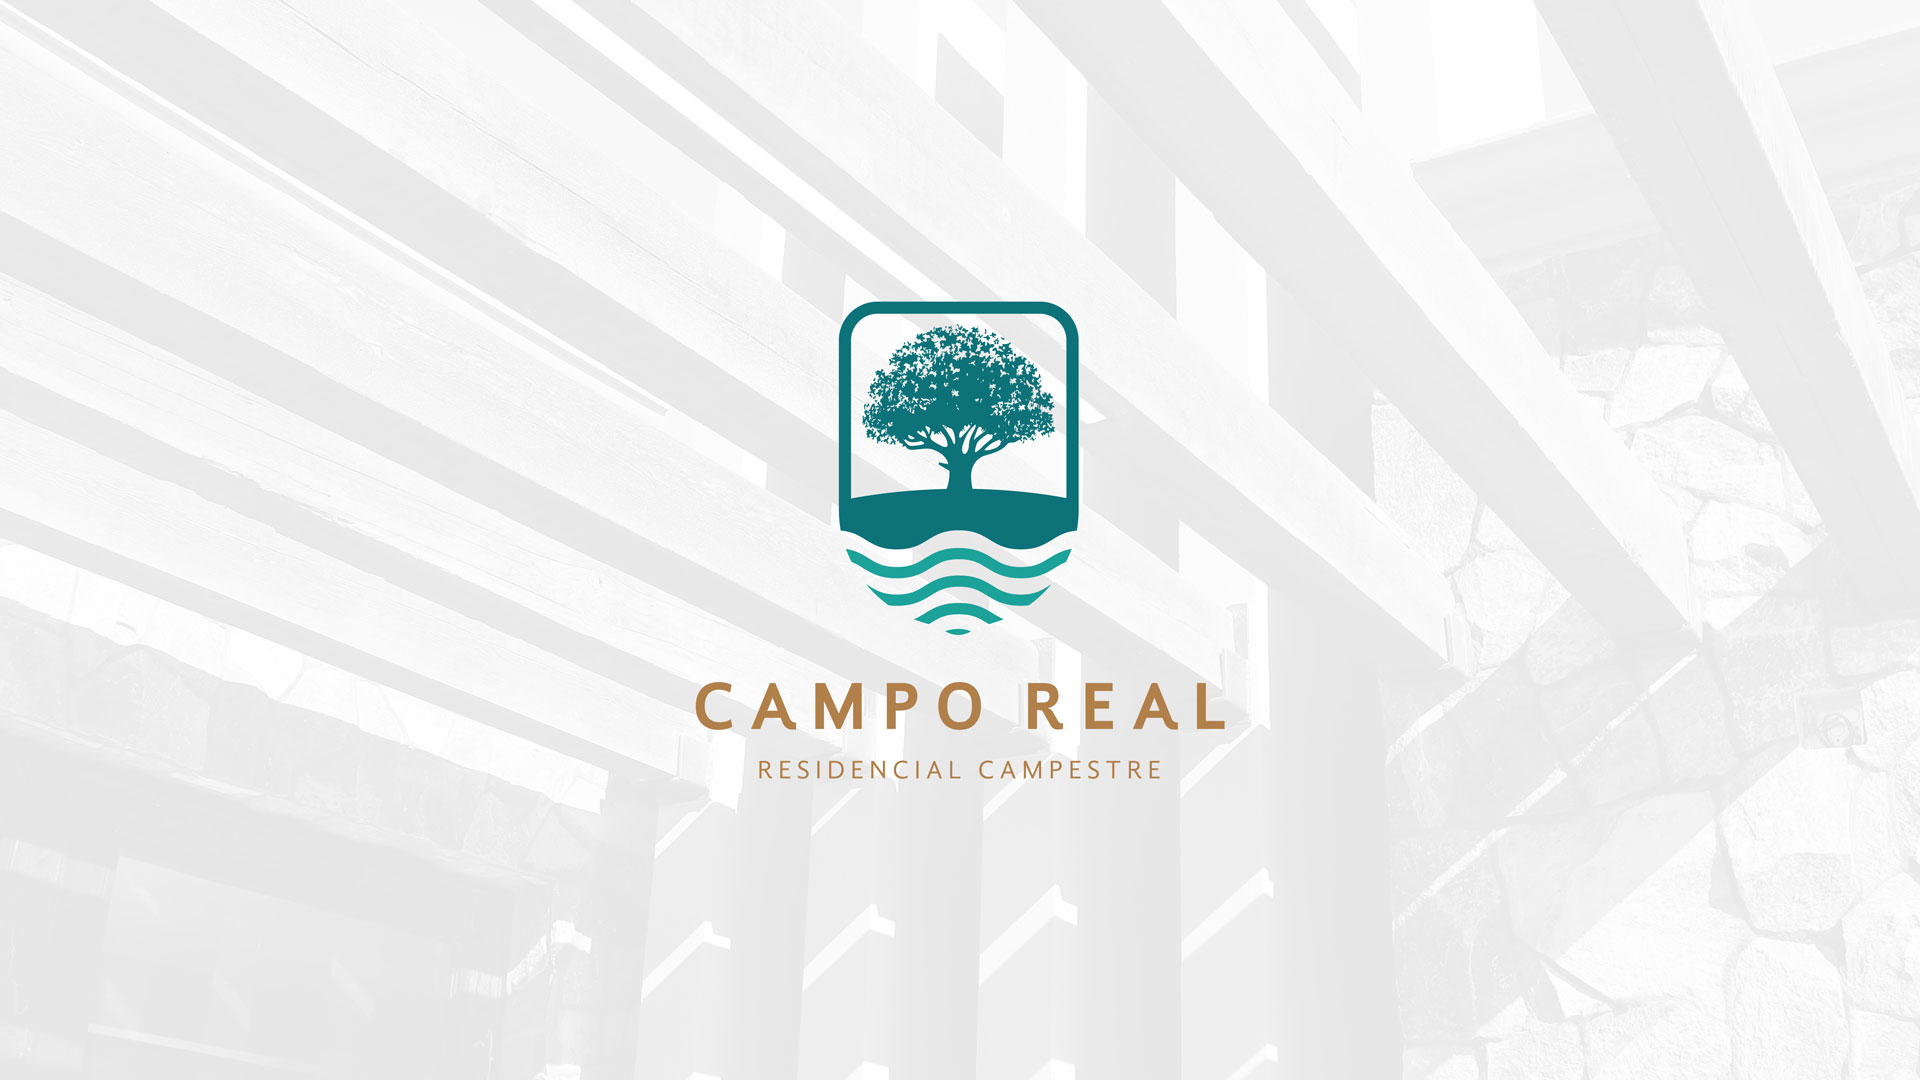 CAMPO REAL